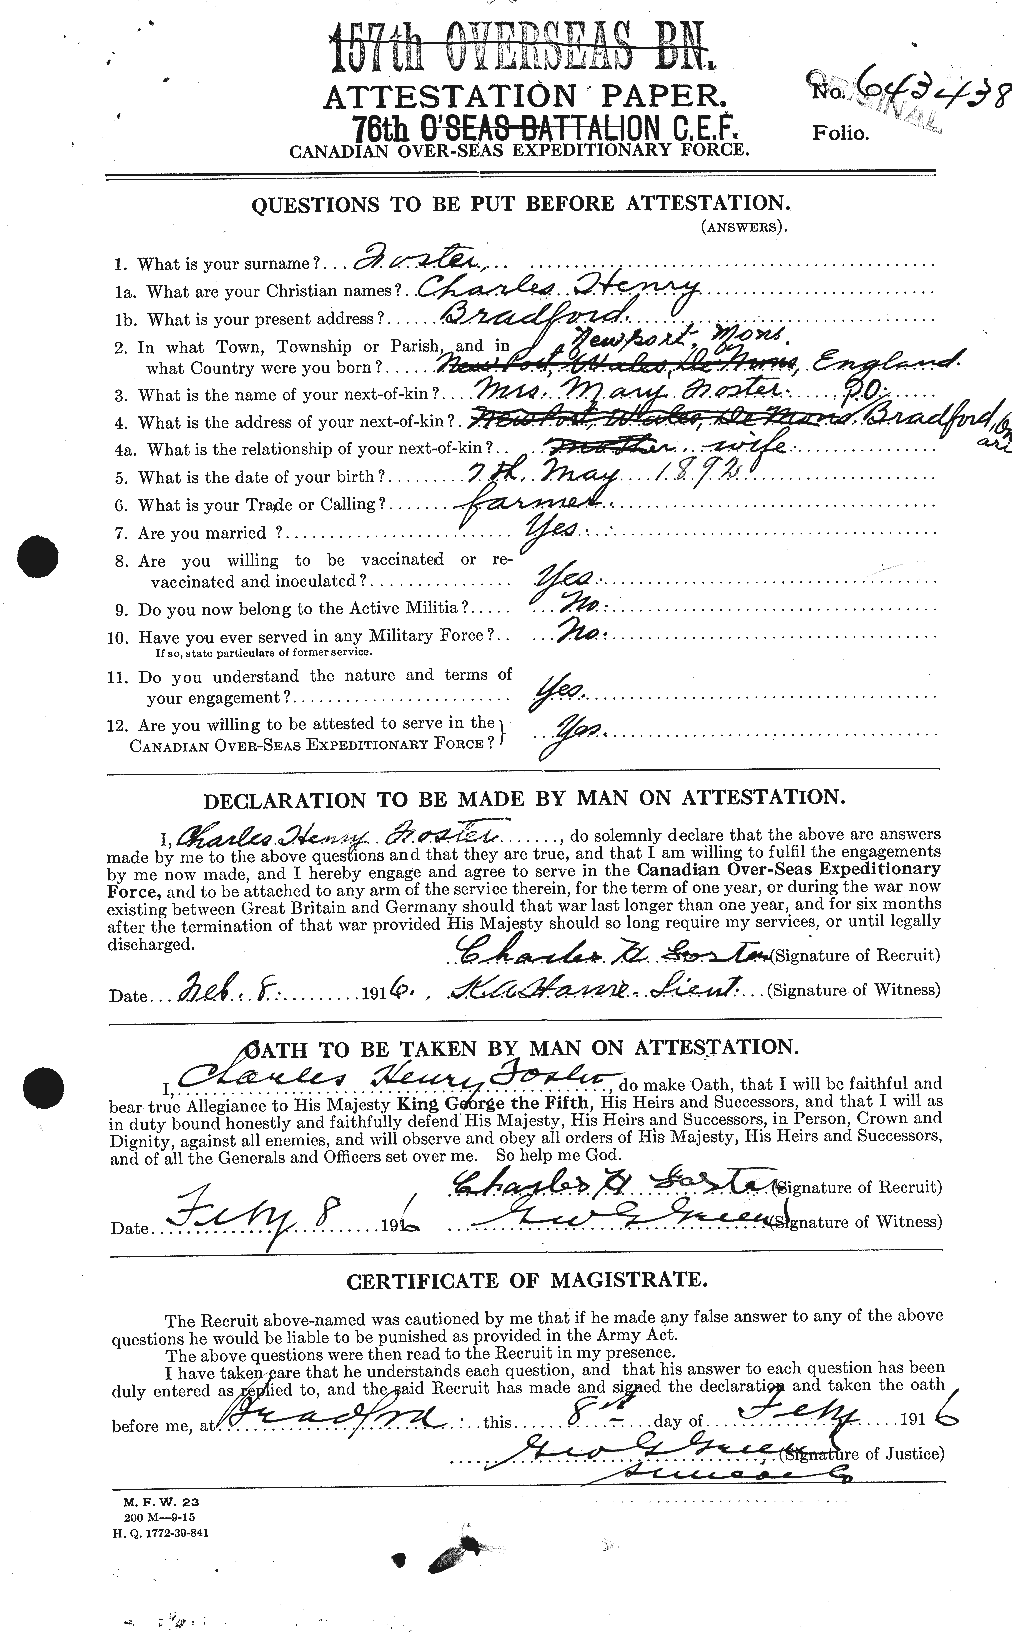 Personnel Records of the First World War - CEF 330519a